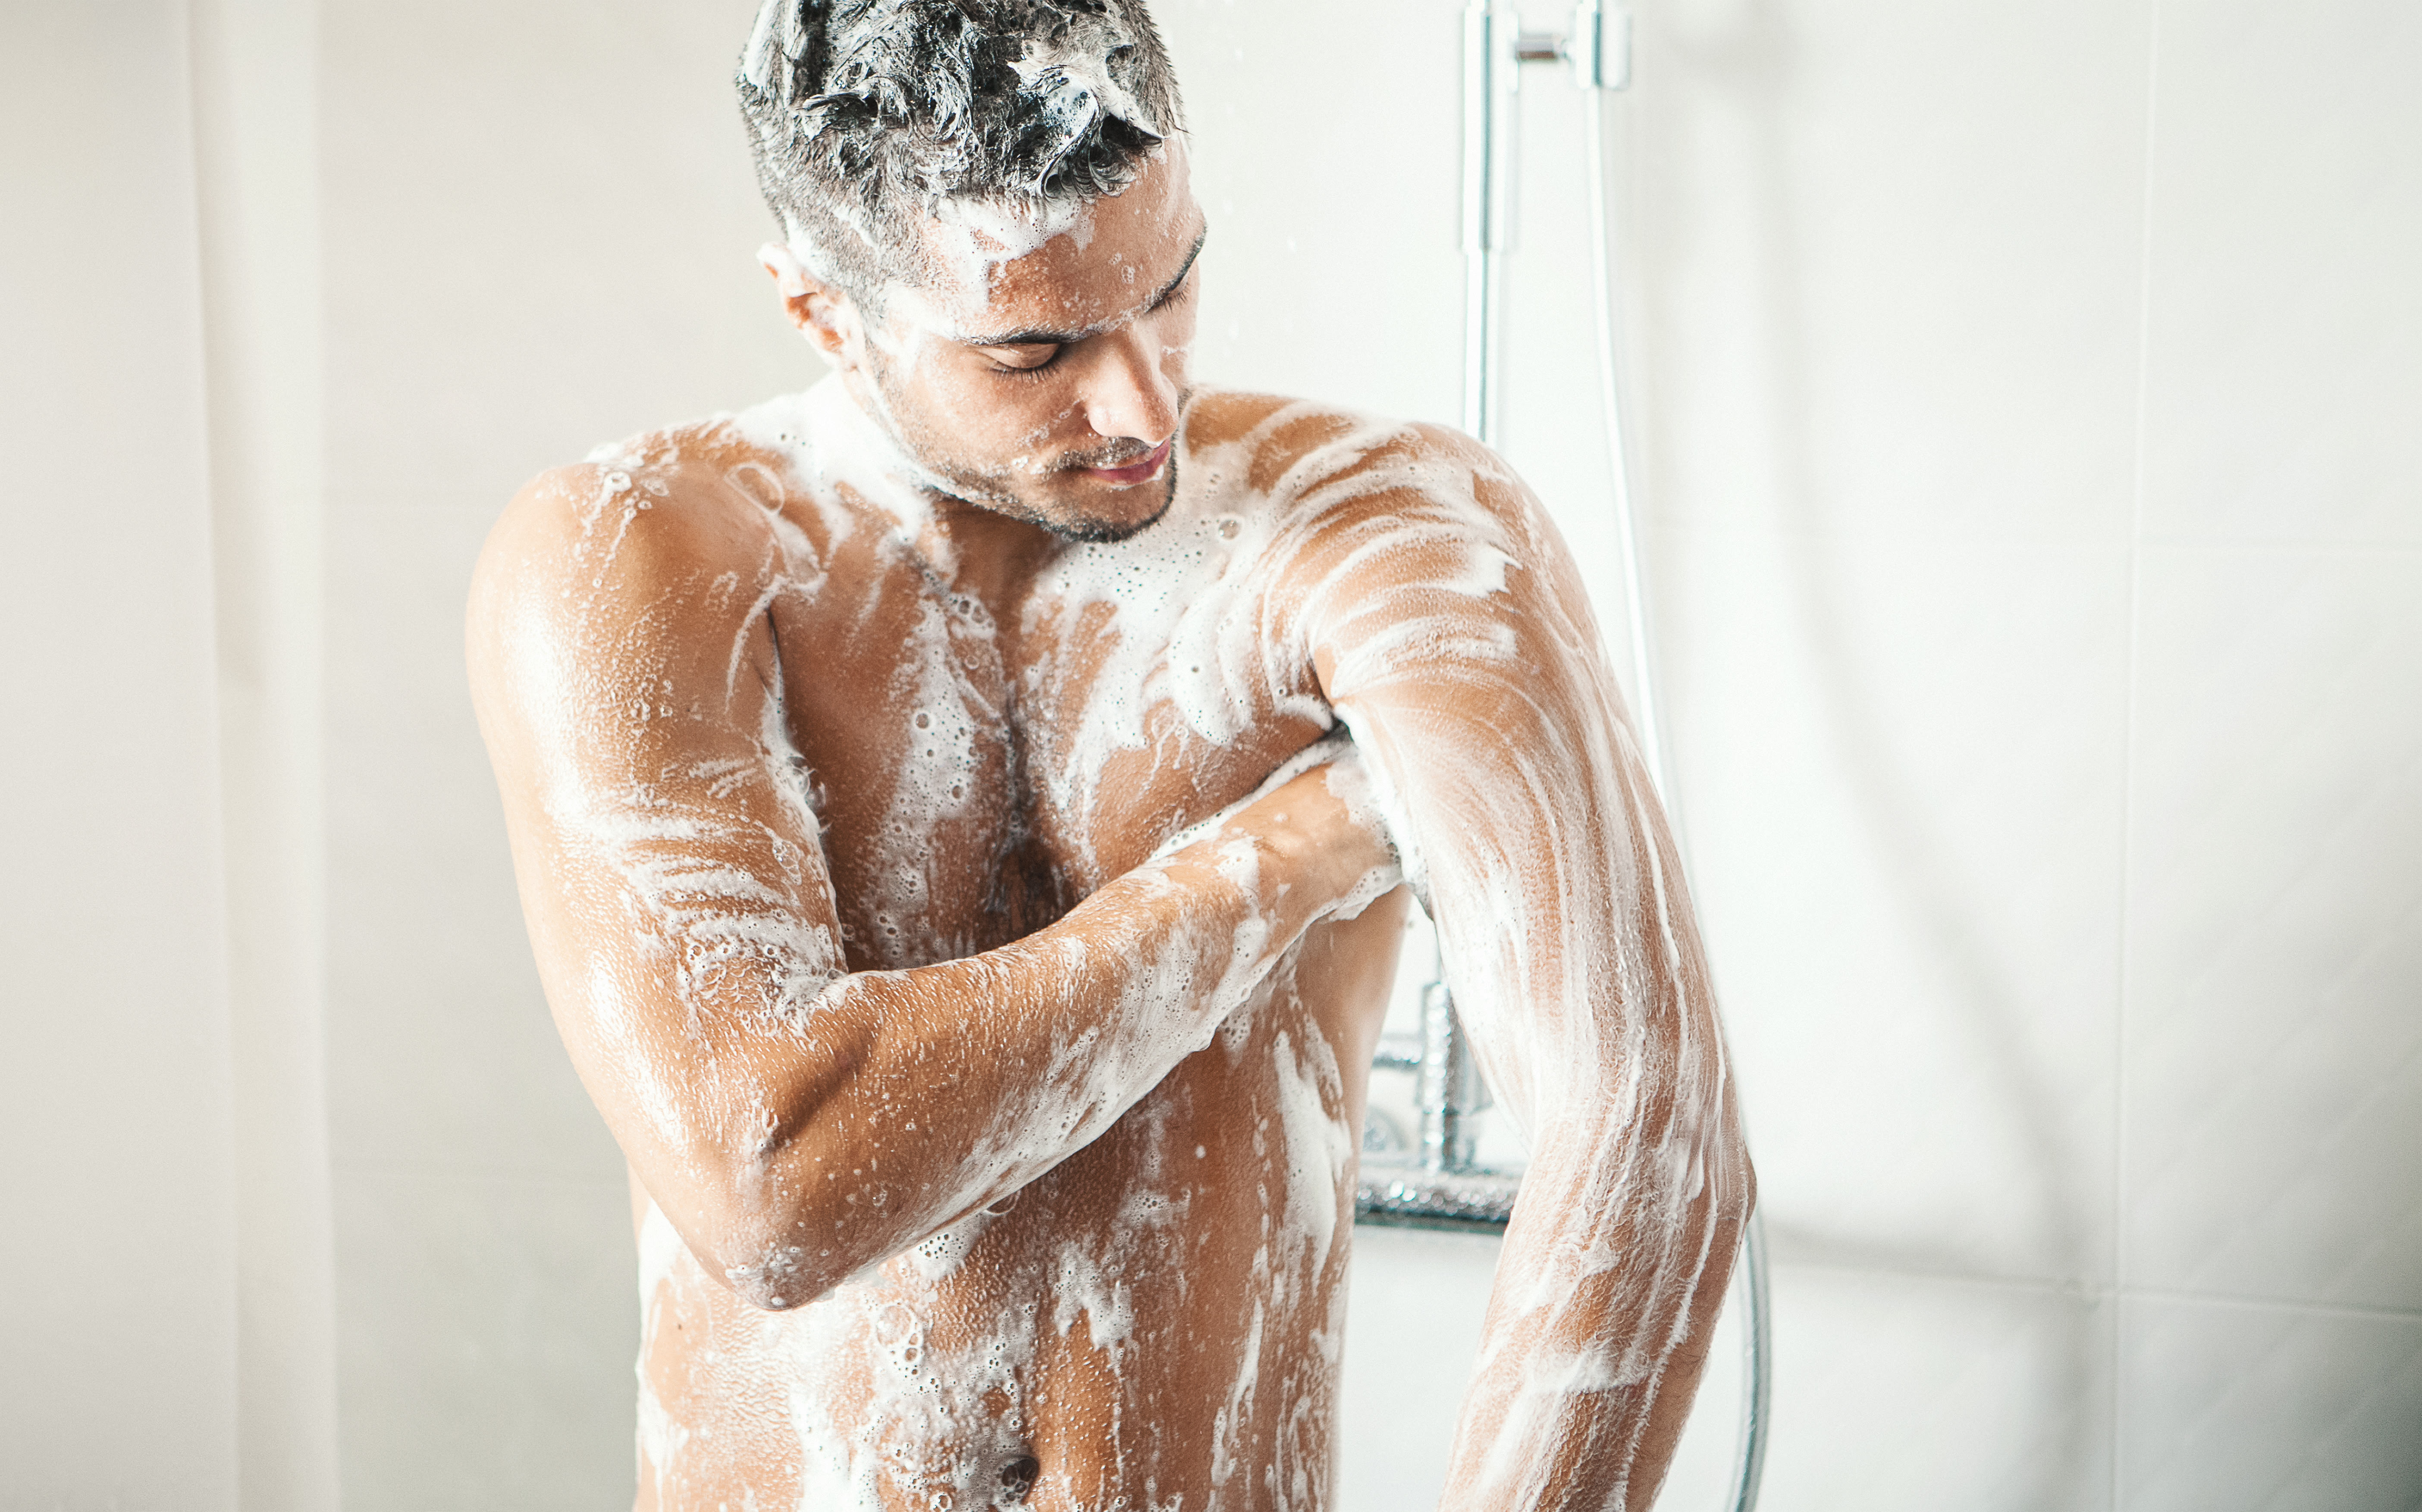 Extra sweaty and smelly this summer? You probably don't need antibacterial soap for that.